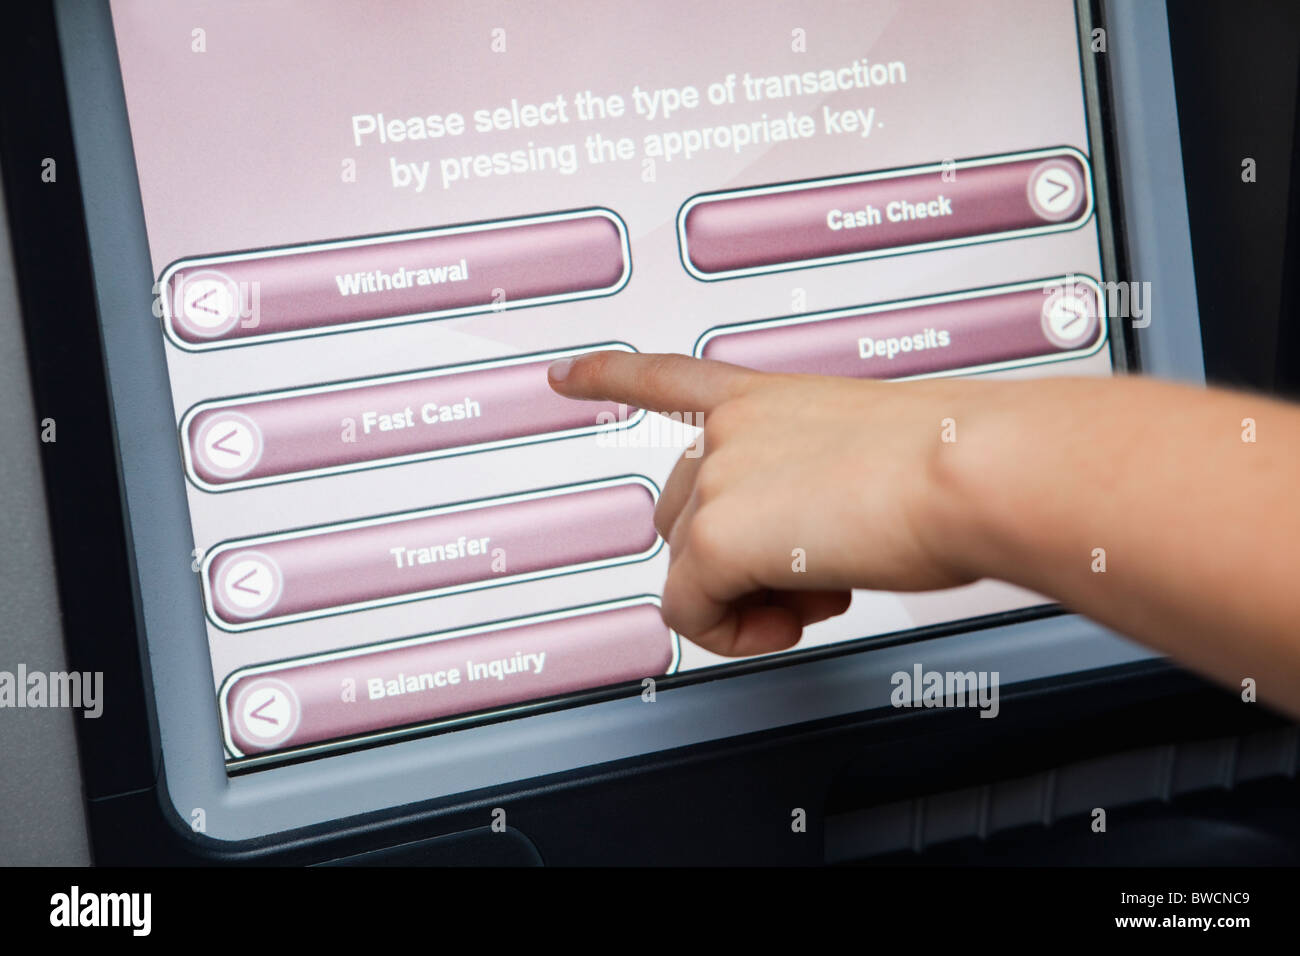 USA, Illinois, Metamora, Person using atm with touch-sensitive display Stock Photo